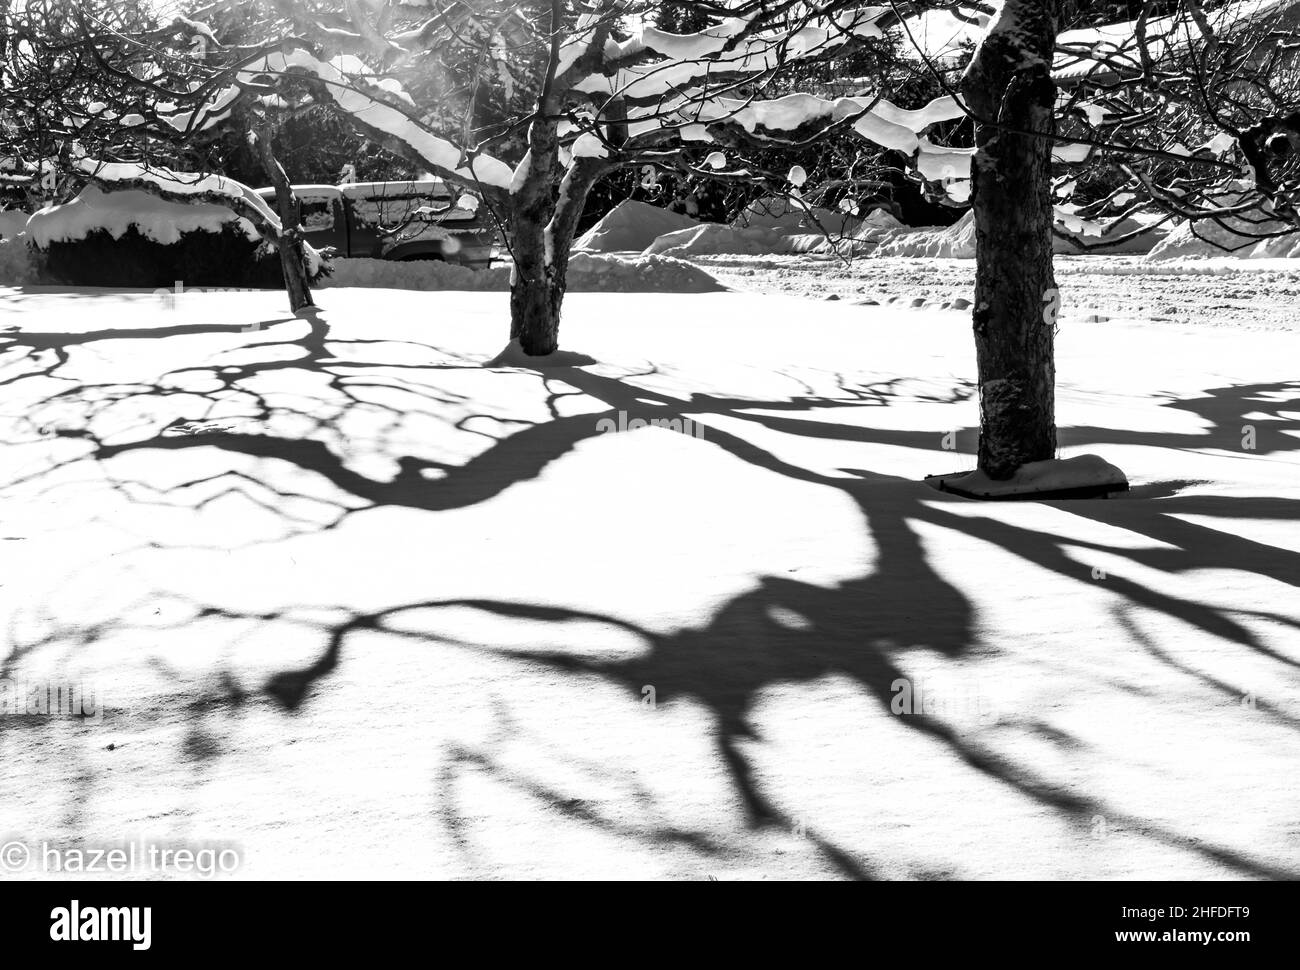 Black and white.  Three trees with twisted branches casting interesting shadows on the snow. Stock Photo